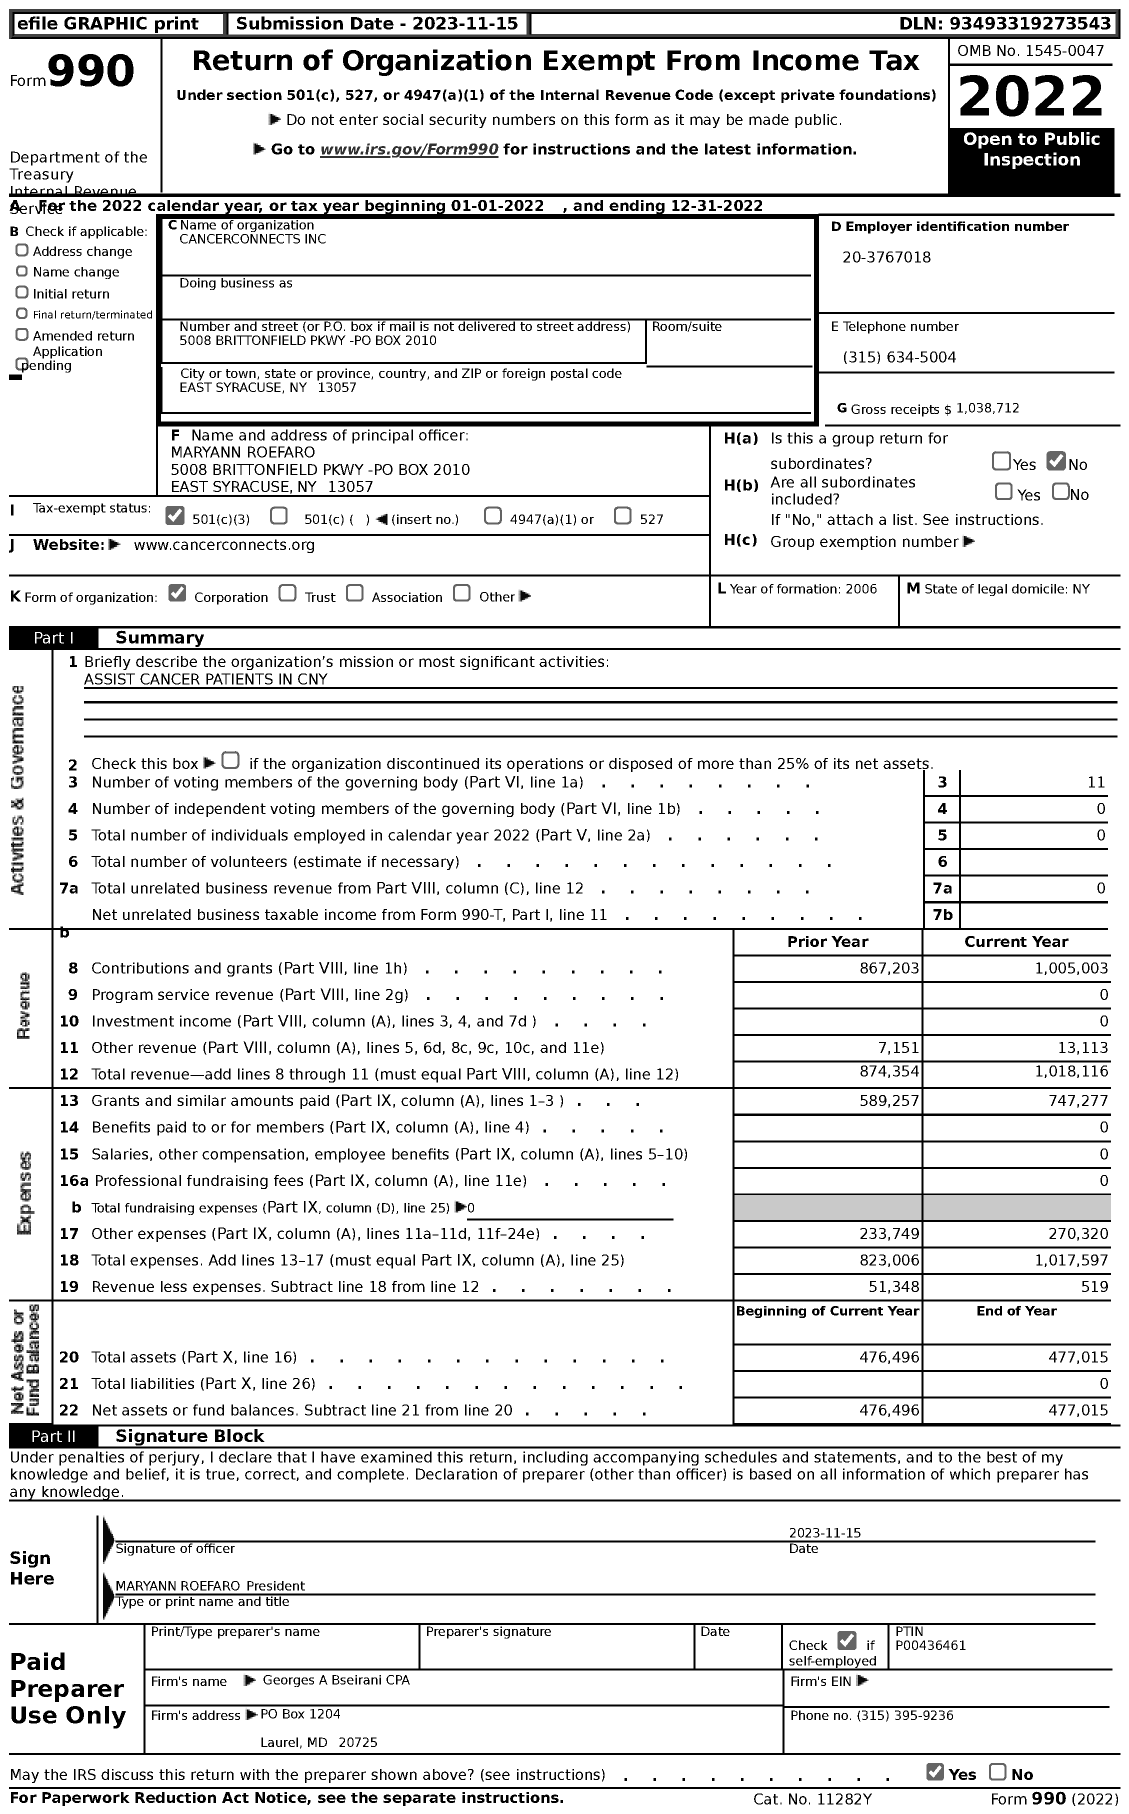 Image of first page of 2022 Form 990 for Cancerconnects